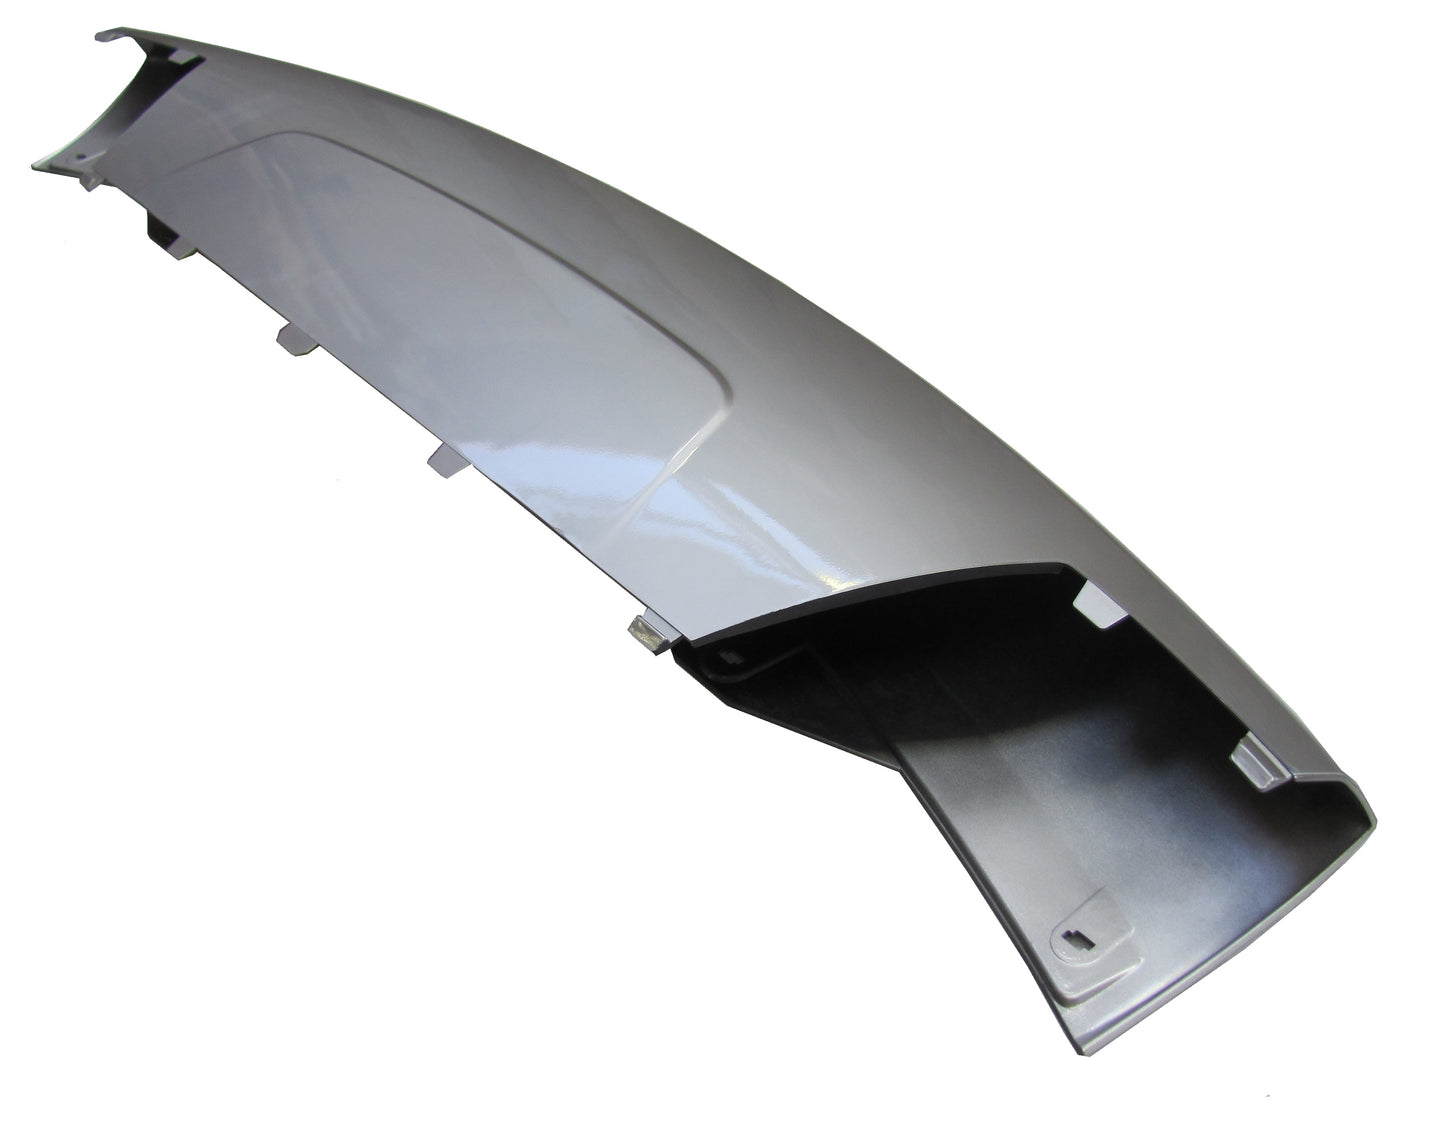 Front Tow Eye Cover for Range Rover Sport 2010 Autobiography Front Bumper - Silver - Aftermarket